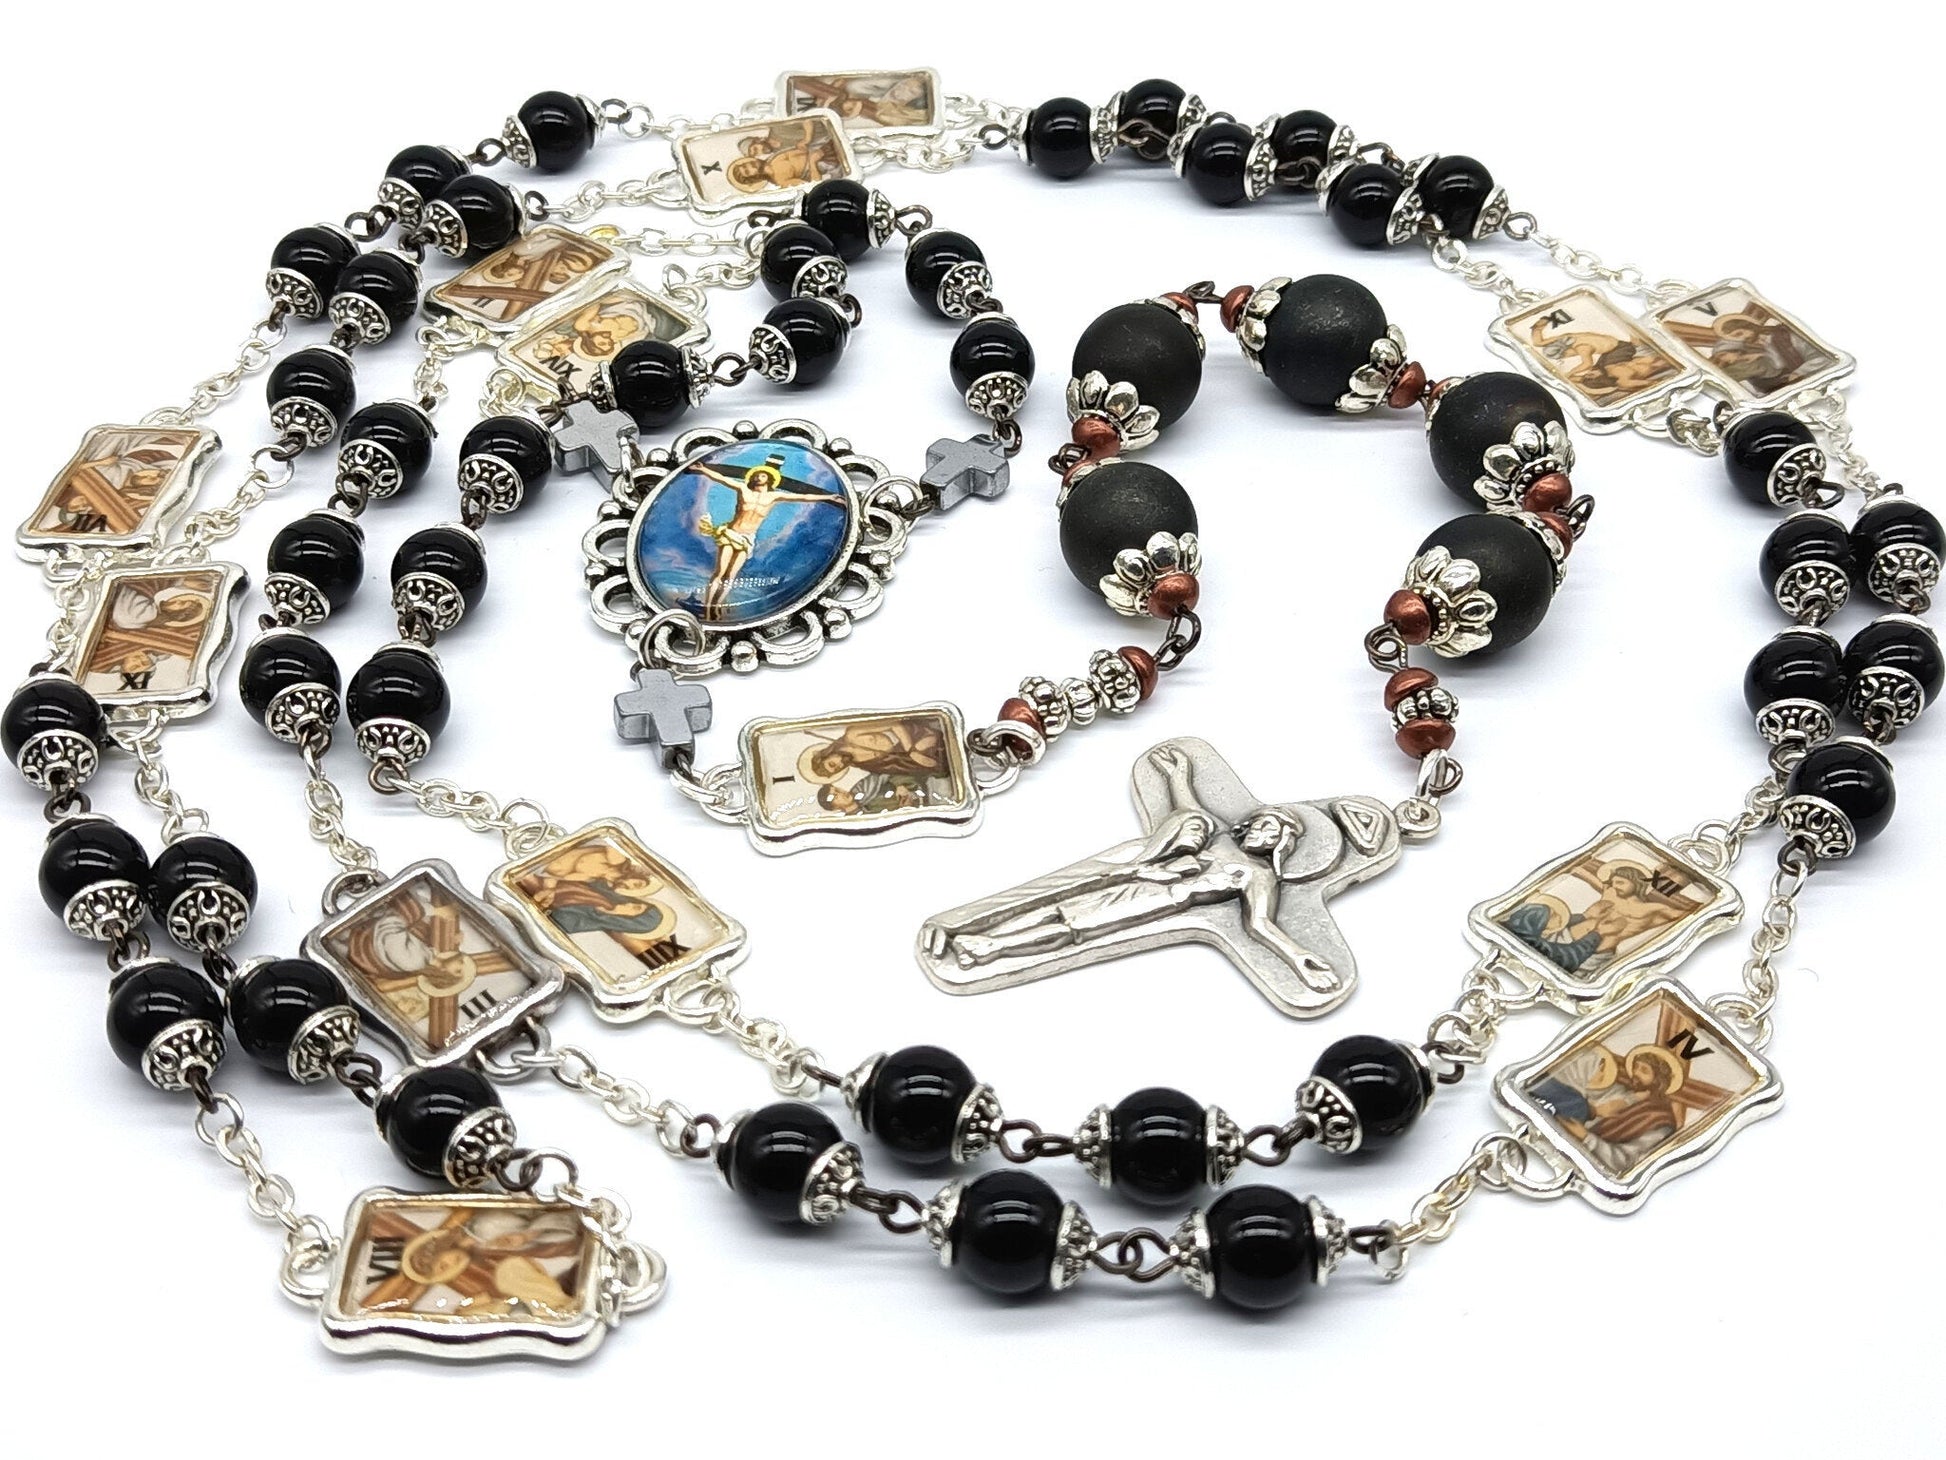 Way of the Cross unique rosary beads chaplet with onyx beads, silver picture medals, crucifix, picture centre medal and bead caps.